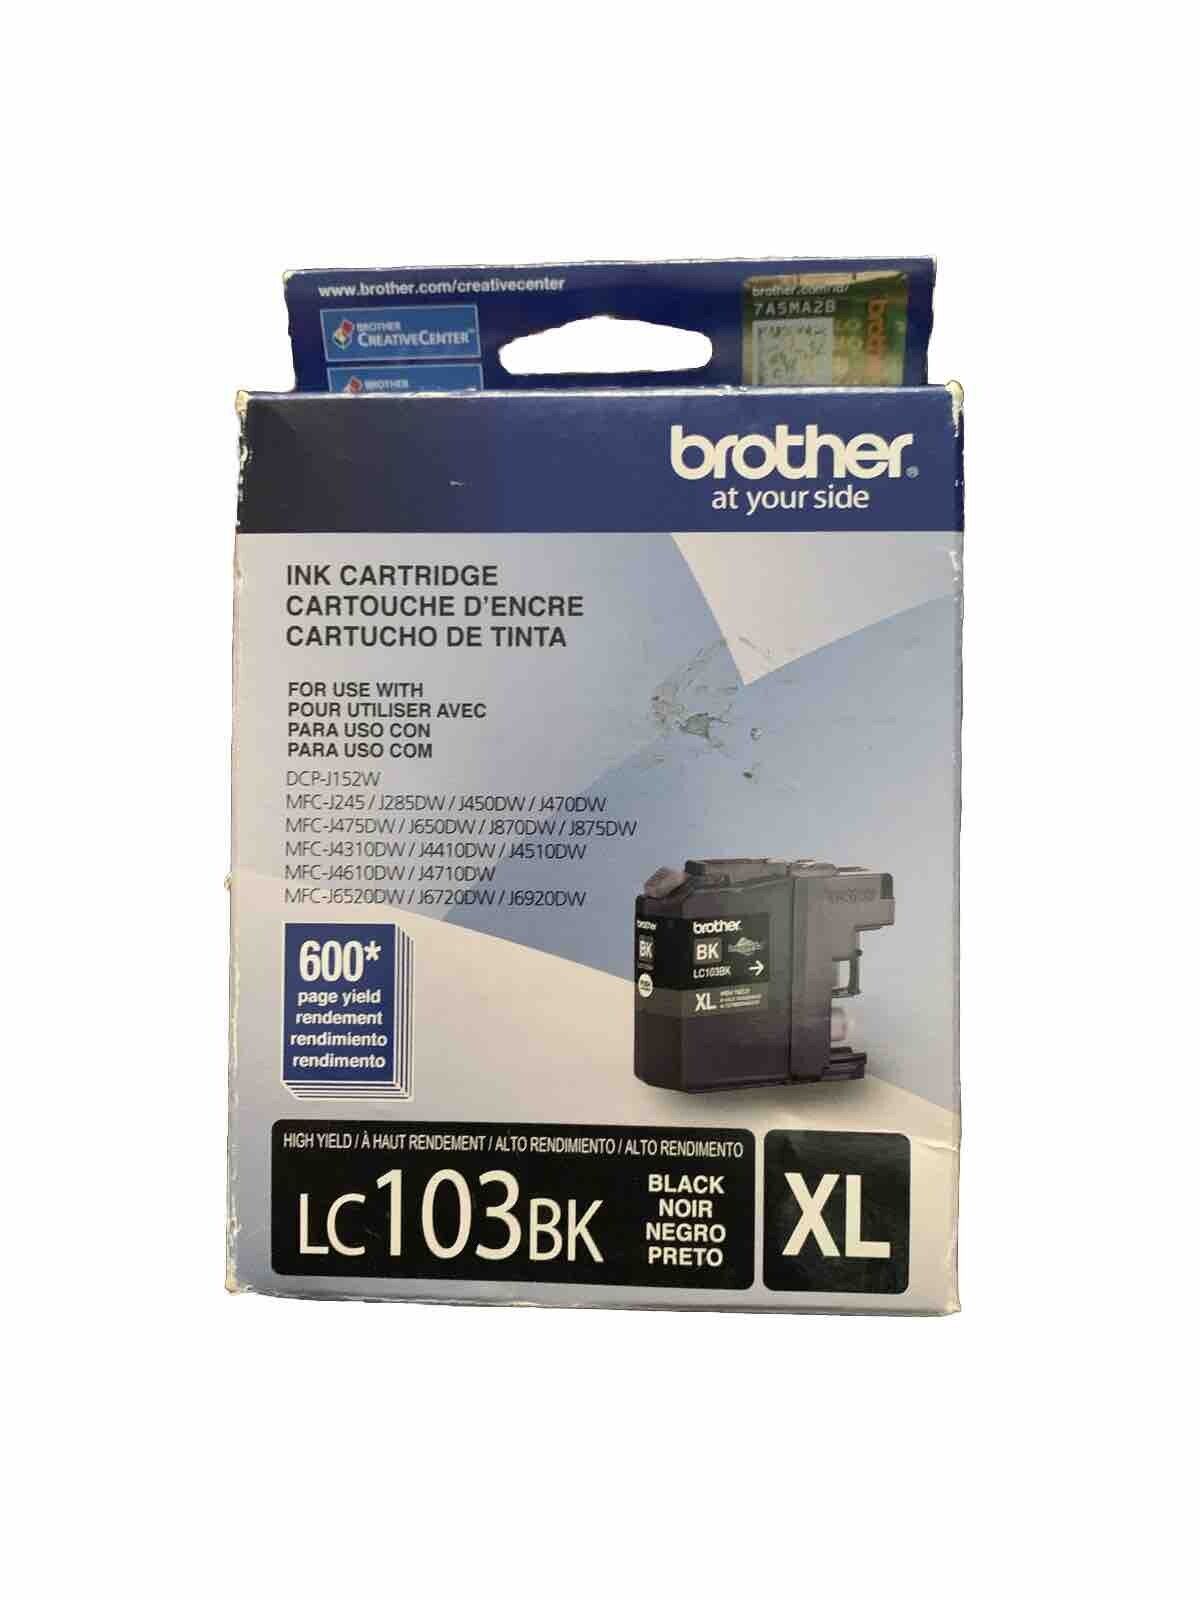 Genuine Brother LC103BK XL Black Ink Cartridge Expired 05/2021 New.